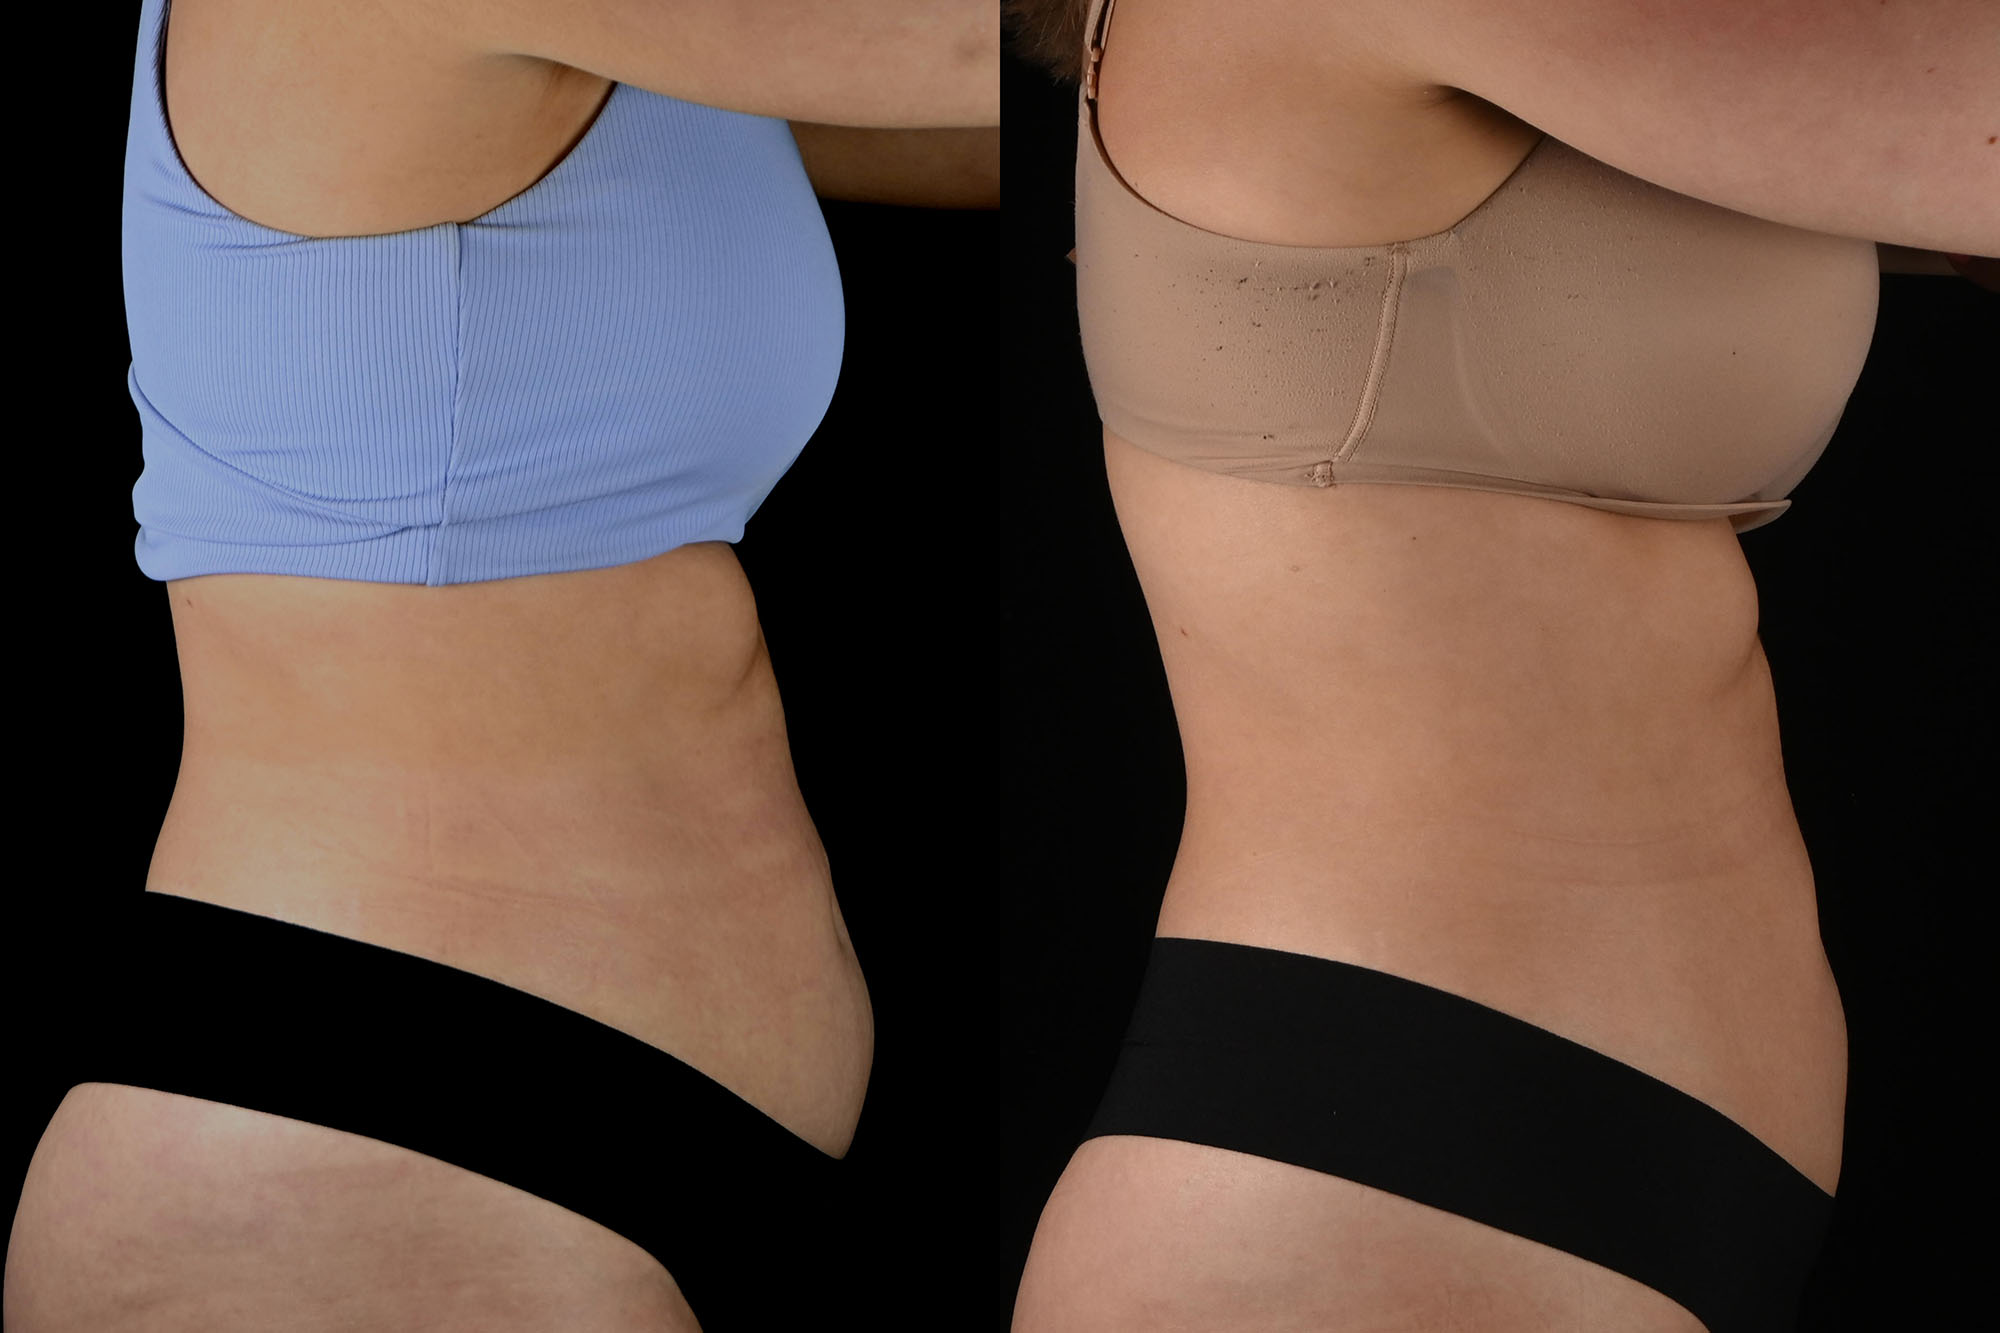 Before and After photo of right side of women showing smaller stomach after truBody treatments.